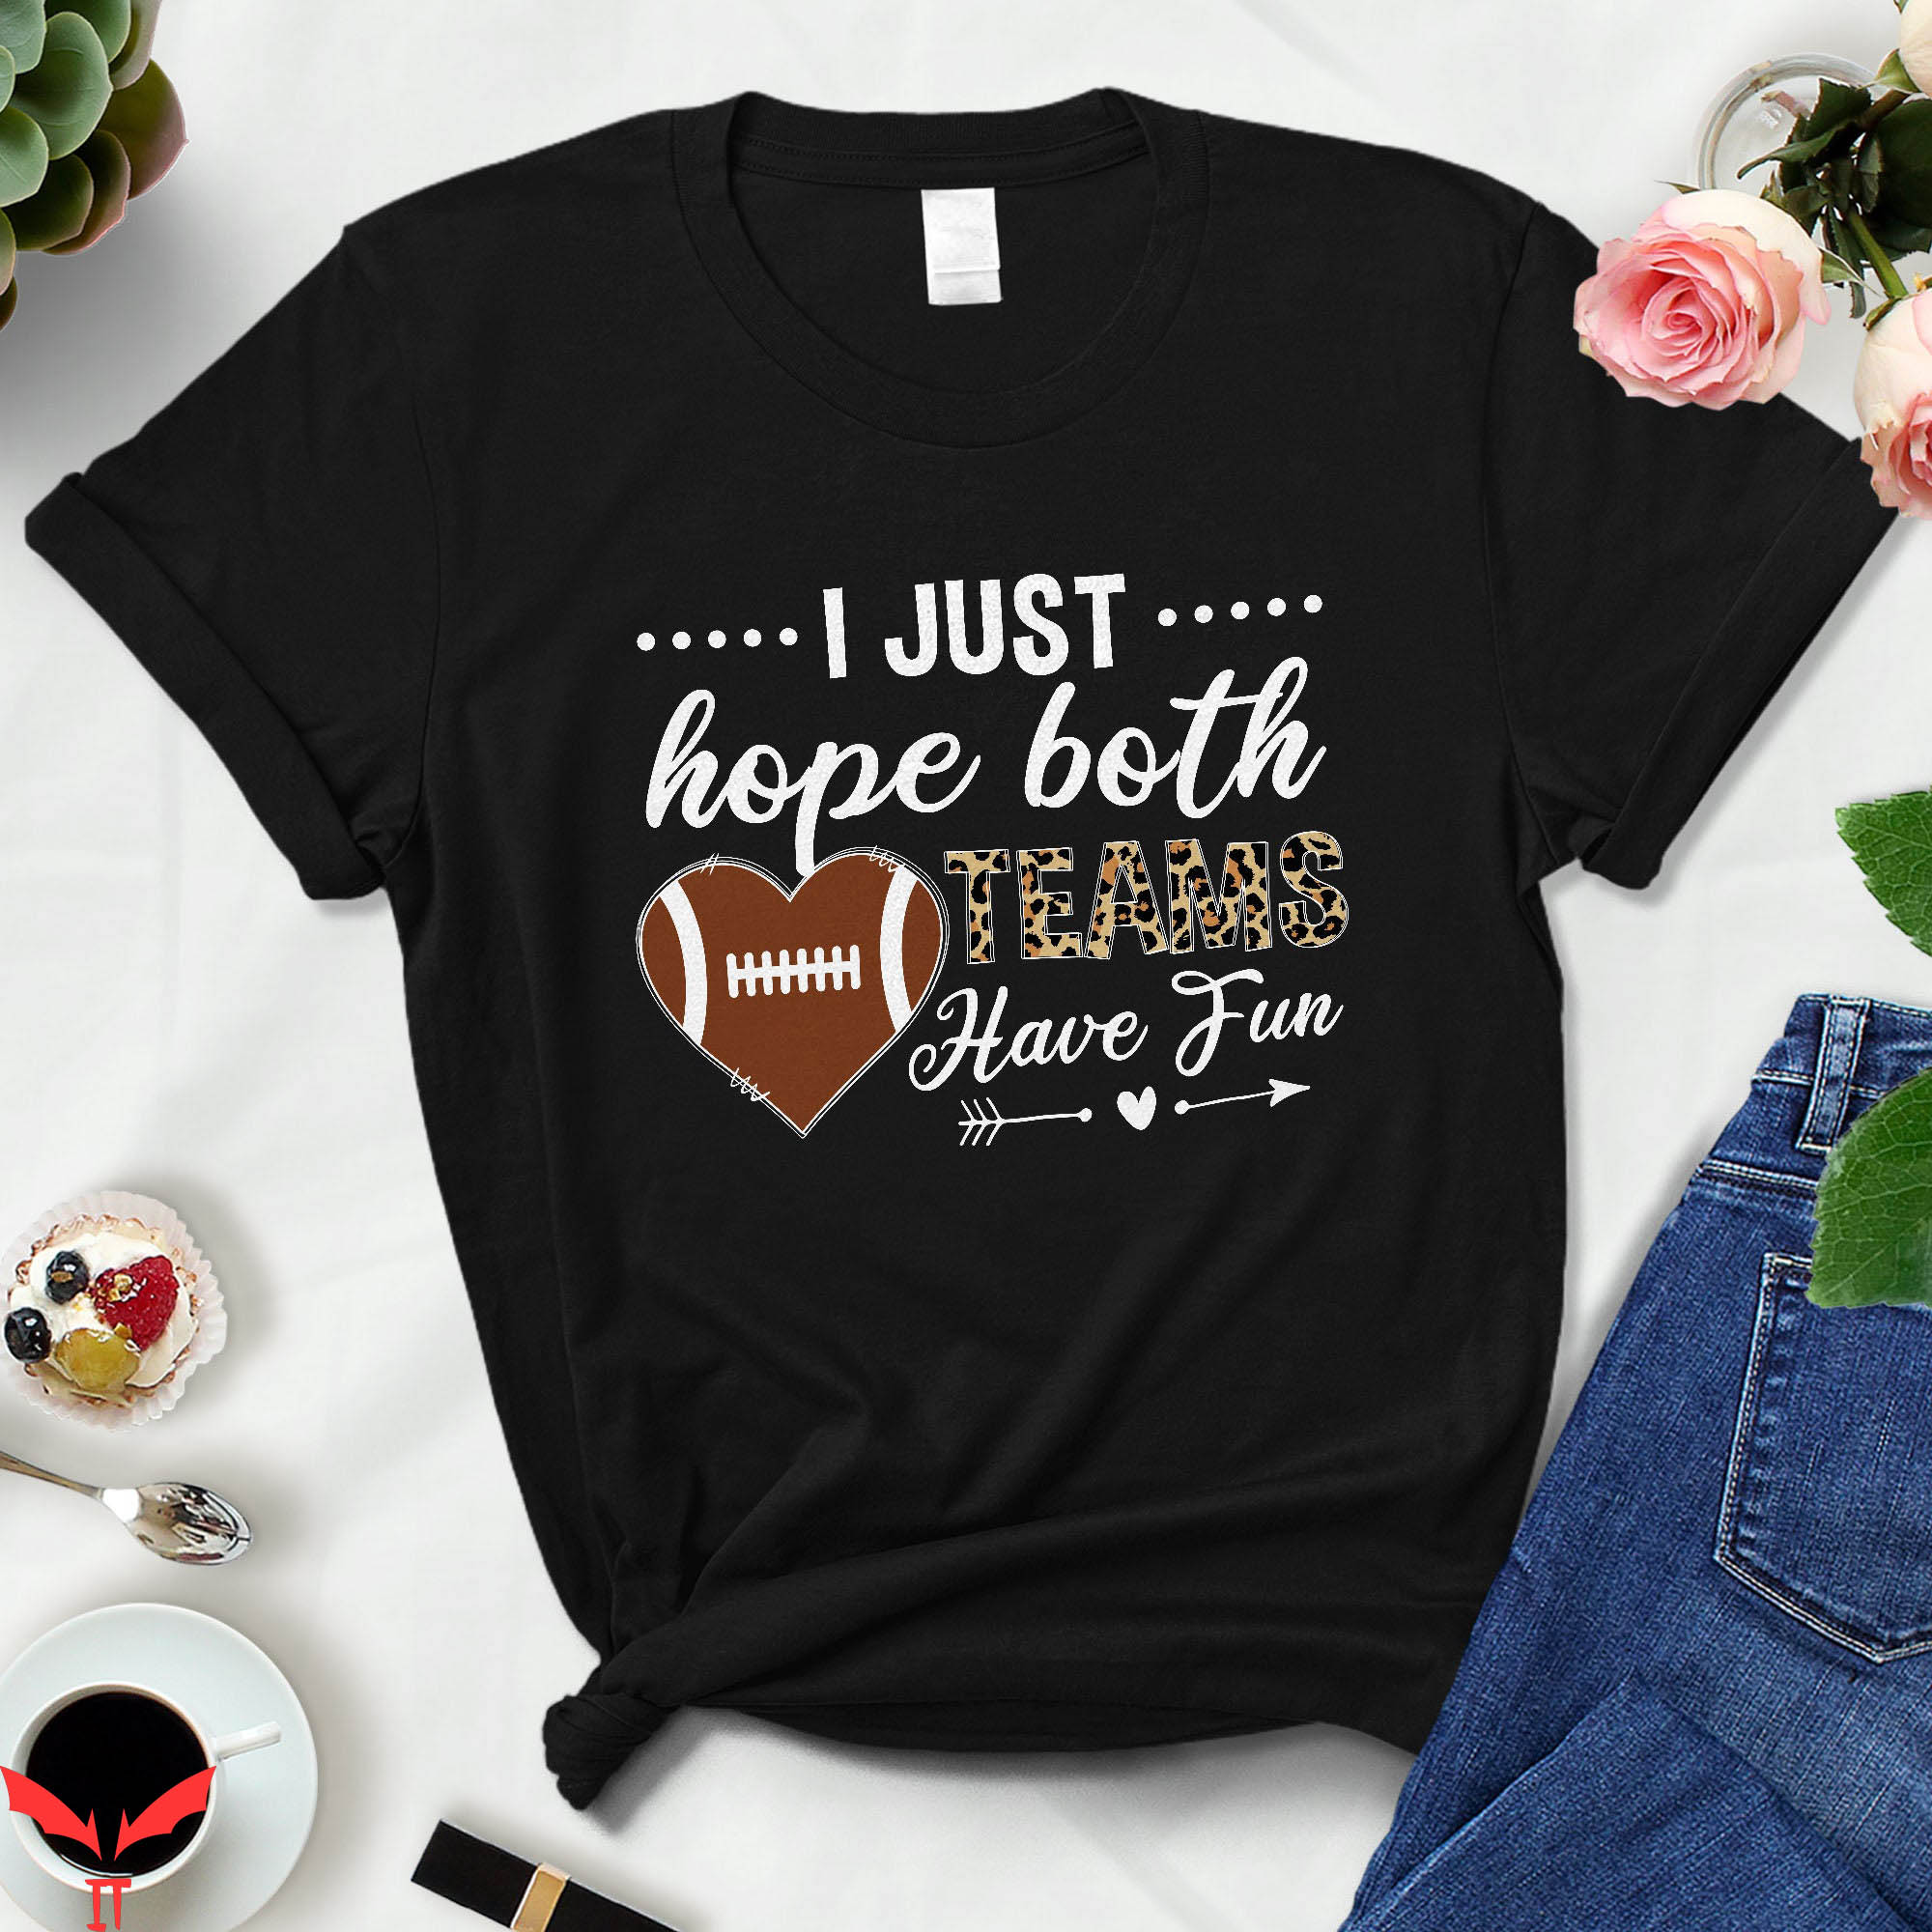 I Just Hope Both Teams Have Fun T-Shirt College Football